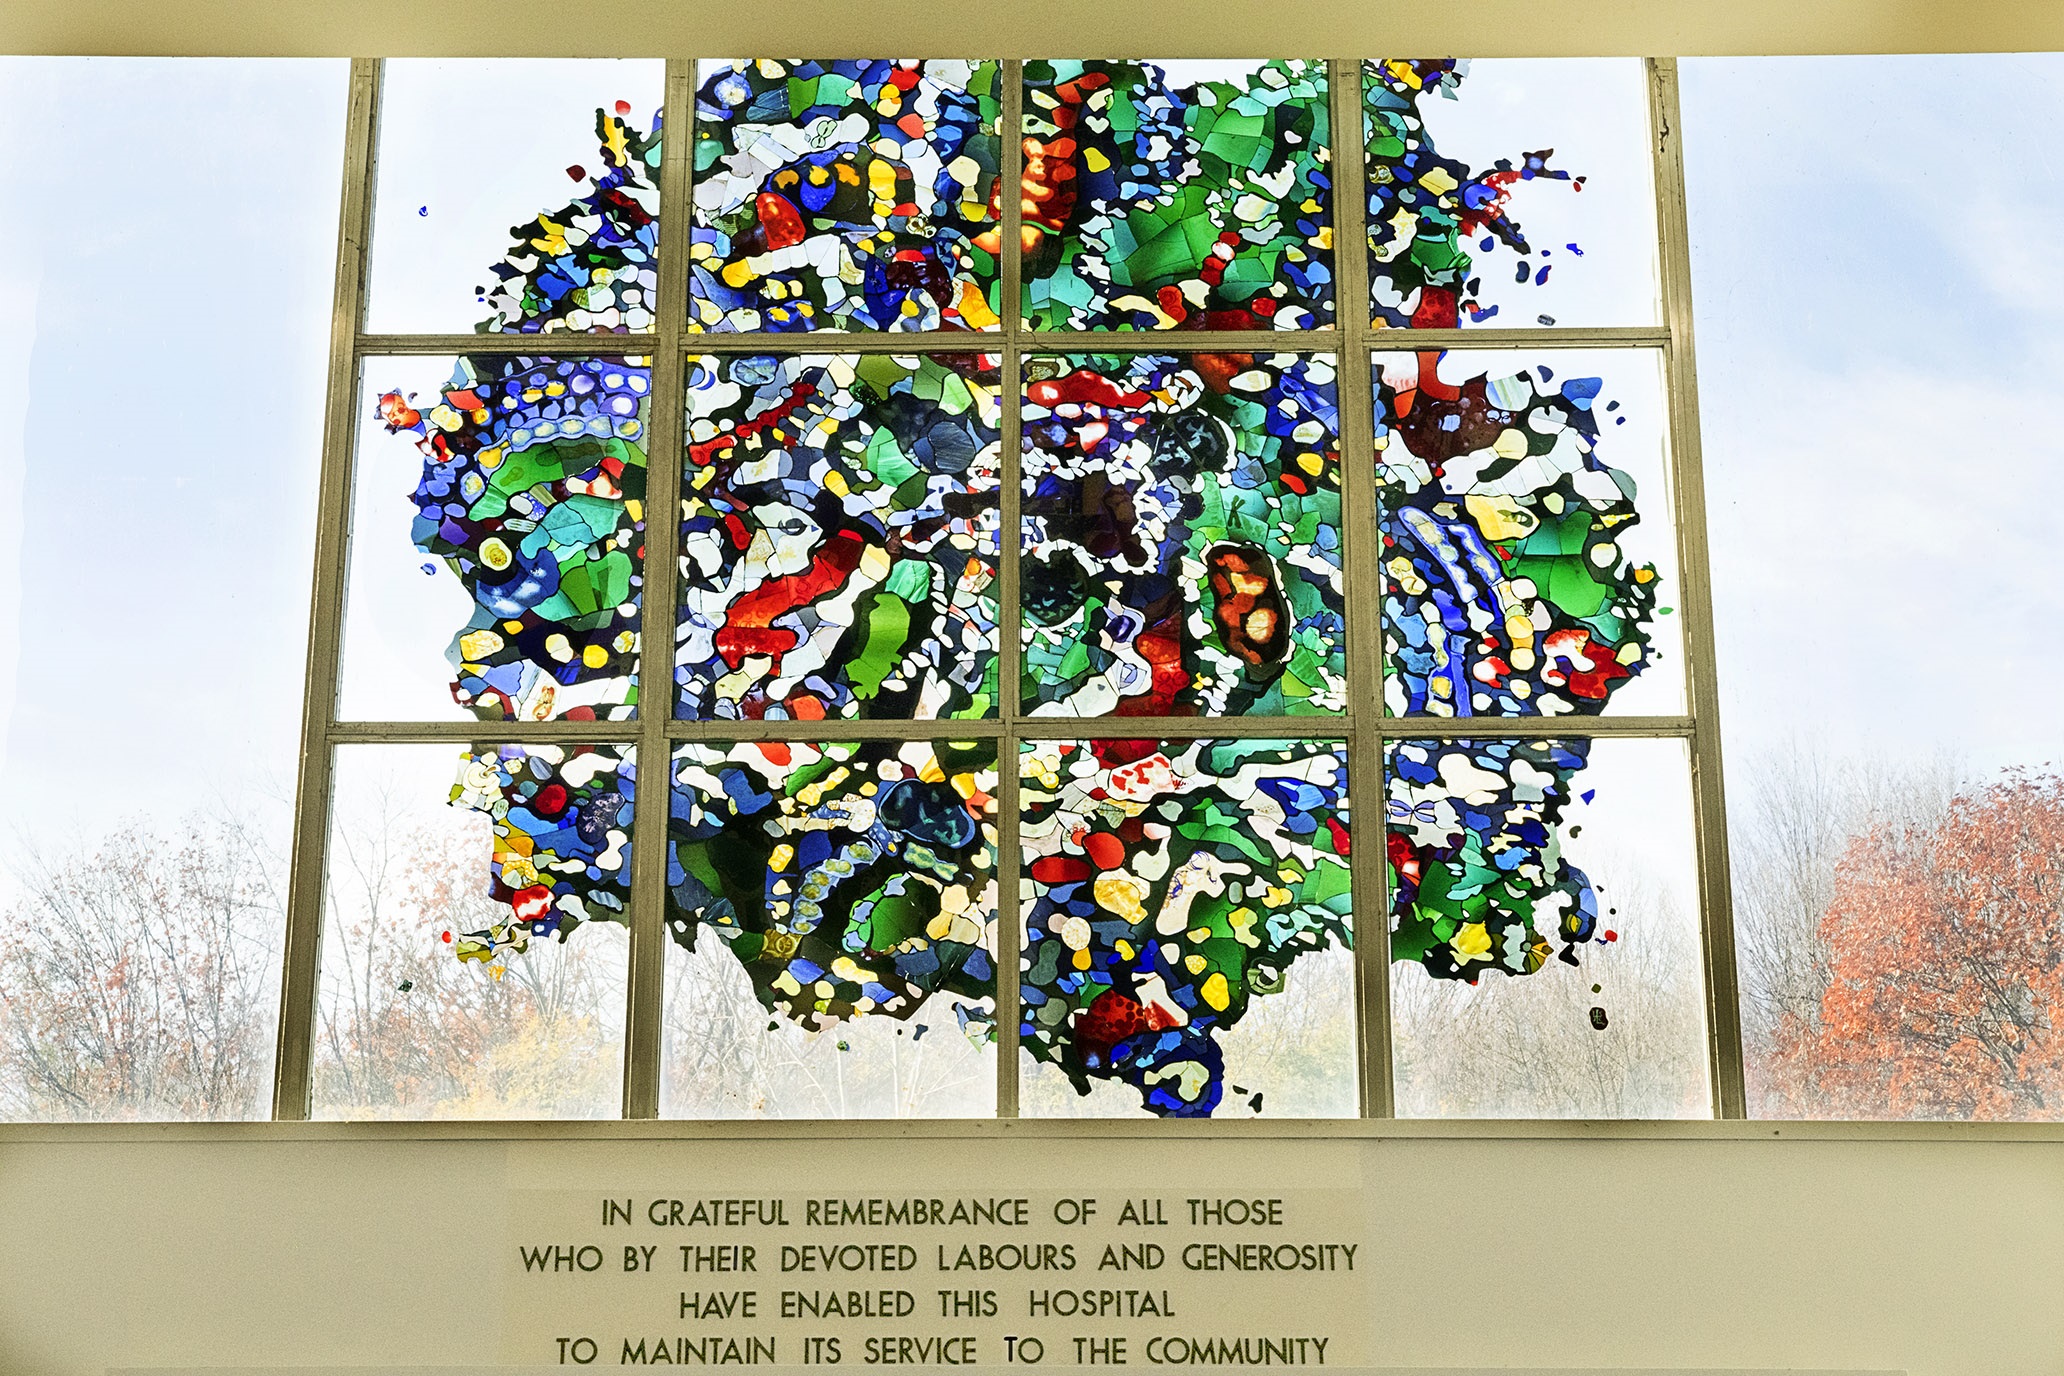 Colourful stained glass window that looks like a cell